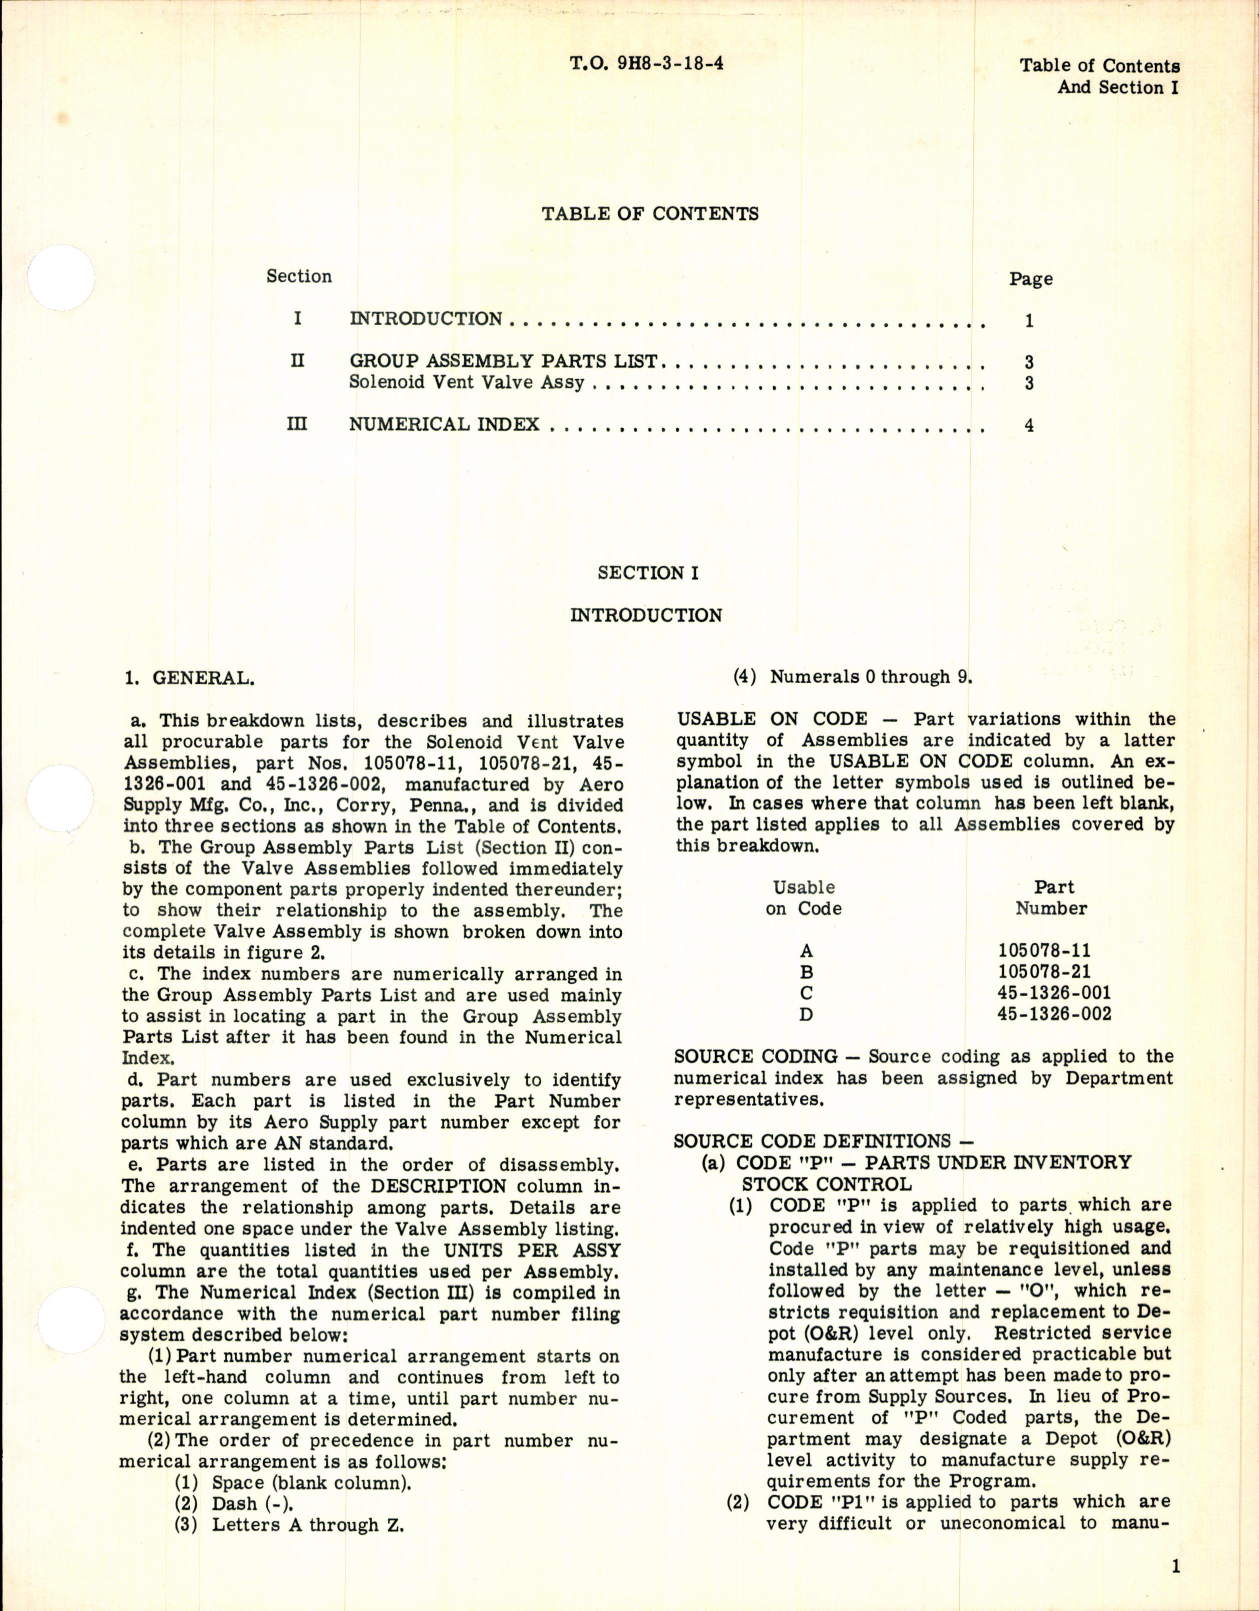 Sample page 3 from AirCorps Library document: Parts Breakdown for Solenoid Vent Valve Assembly